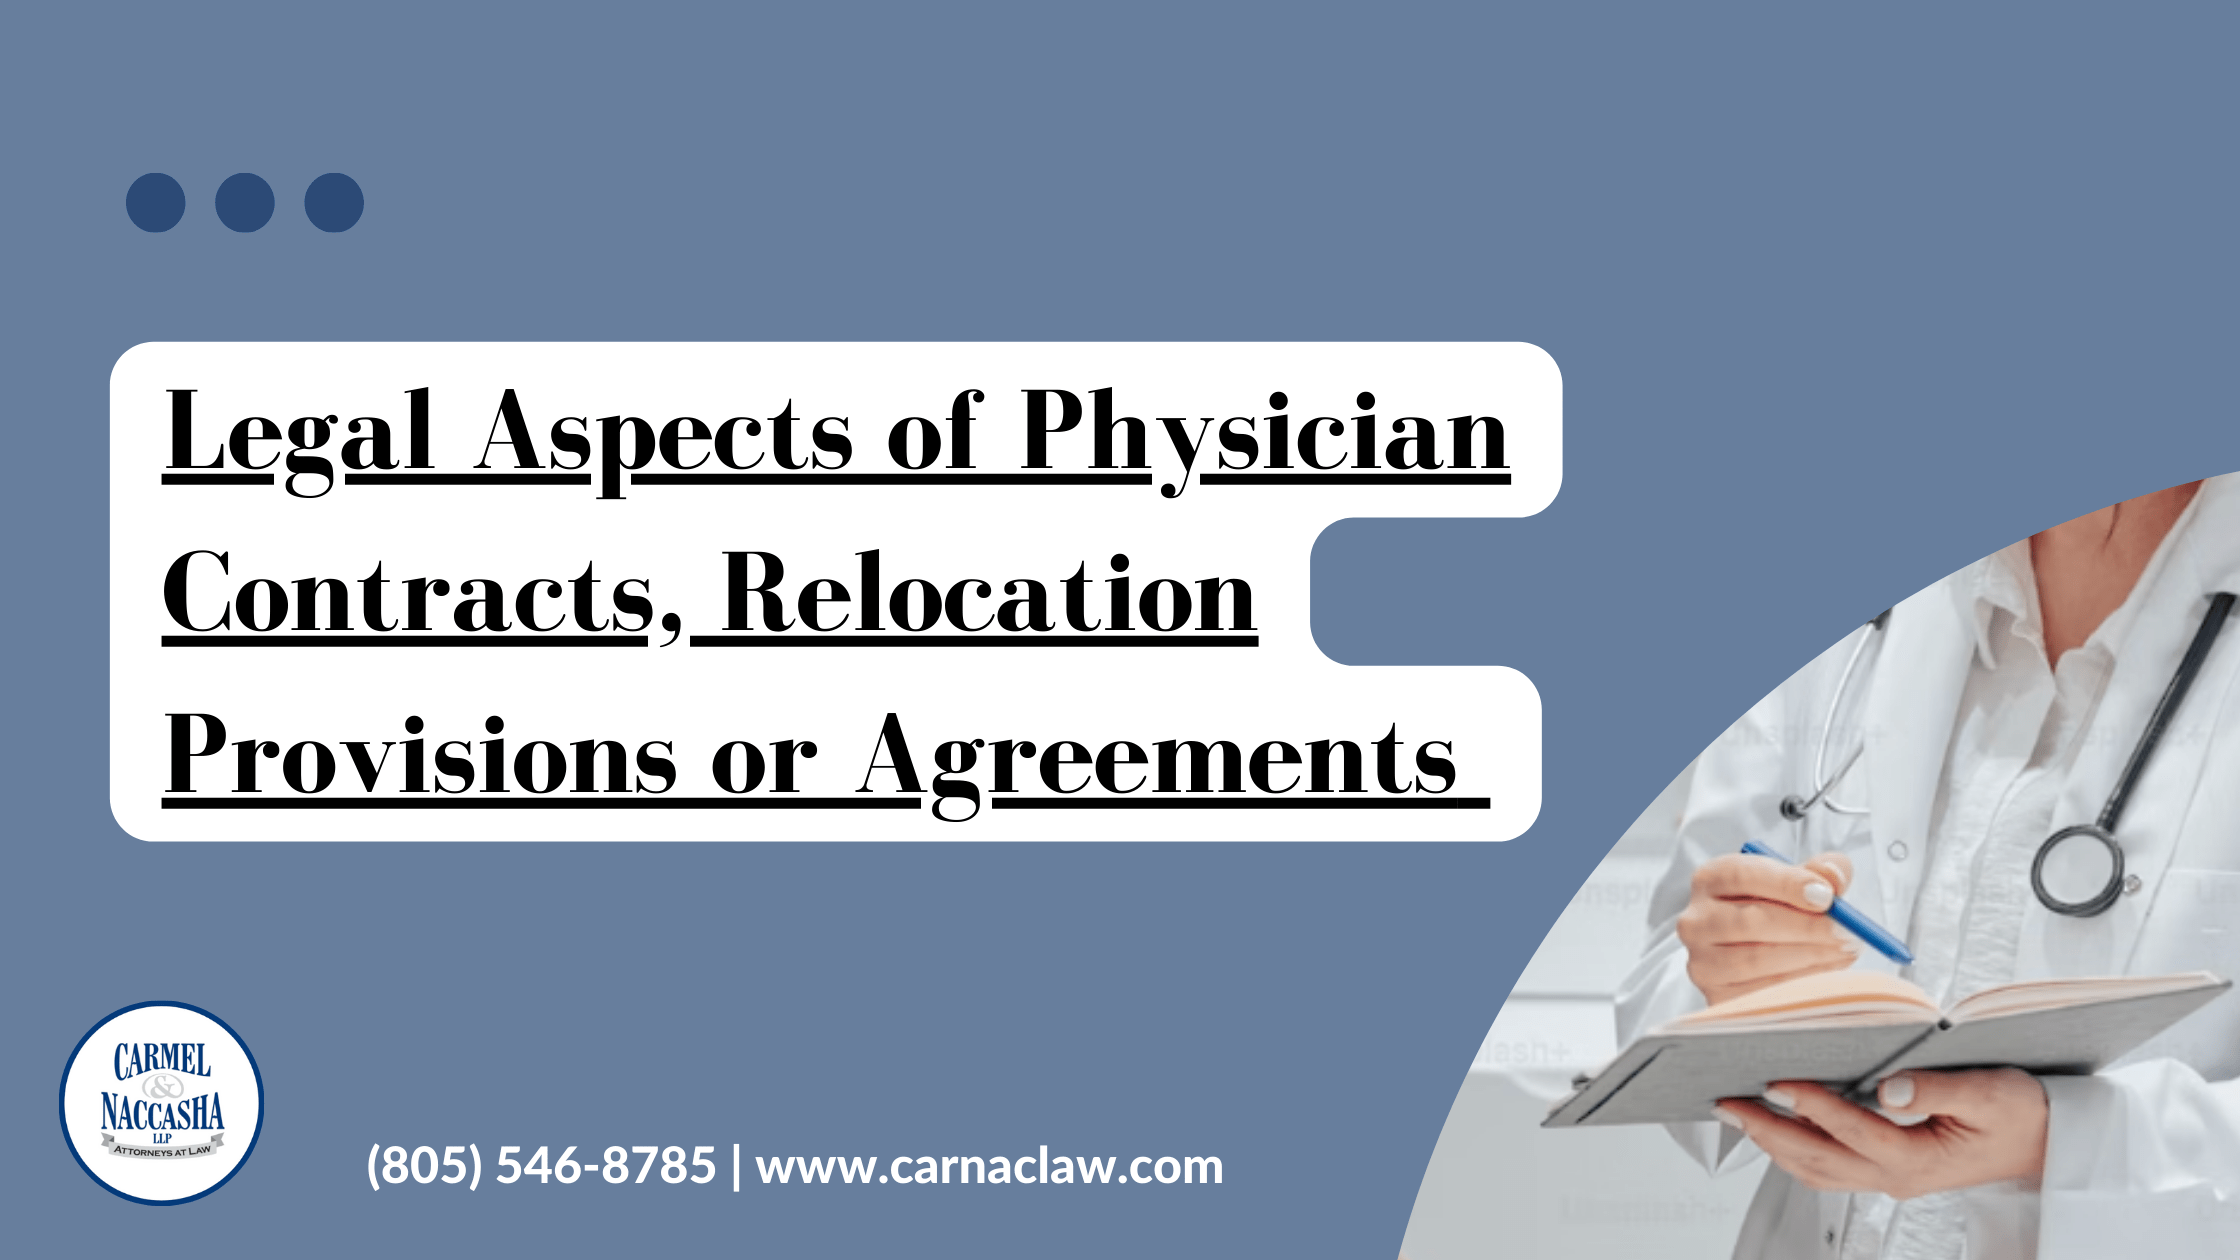 Understanding-Legal Aspects-Physician Contracts-Relocation Provisions-Agreements